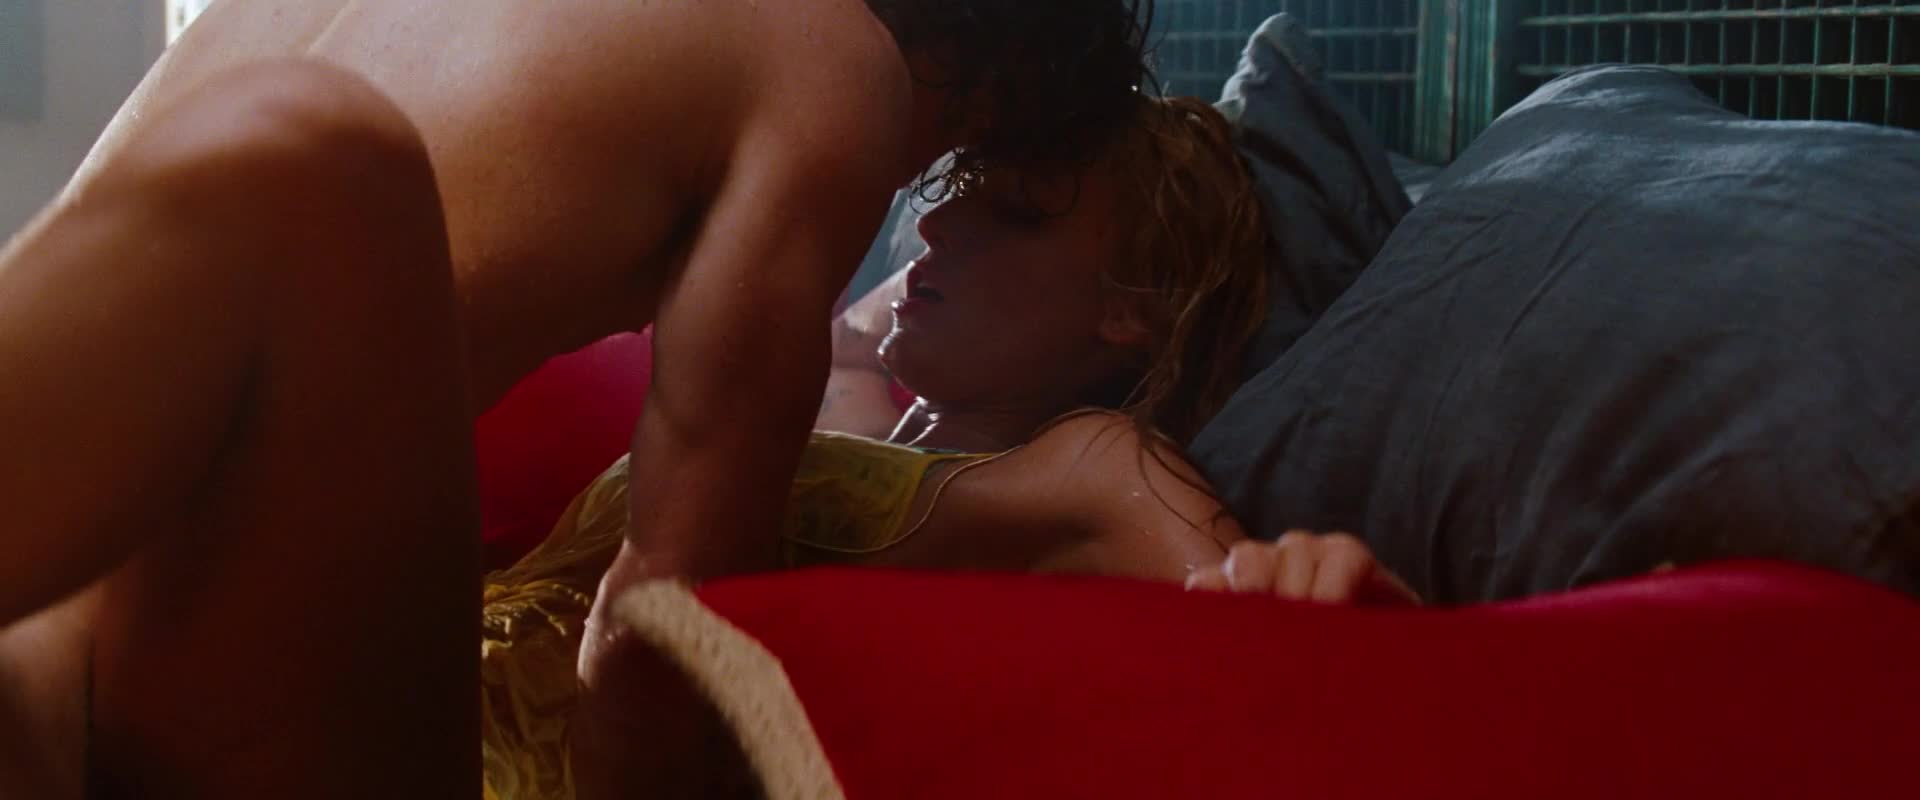 Blake Lively Sex Scene - Nude Scenes: Blake Lively from Savages - GIF Video | nudecelebgifs.com